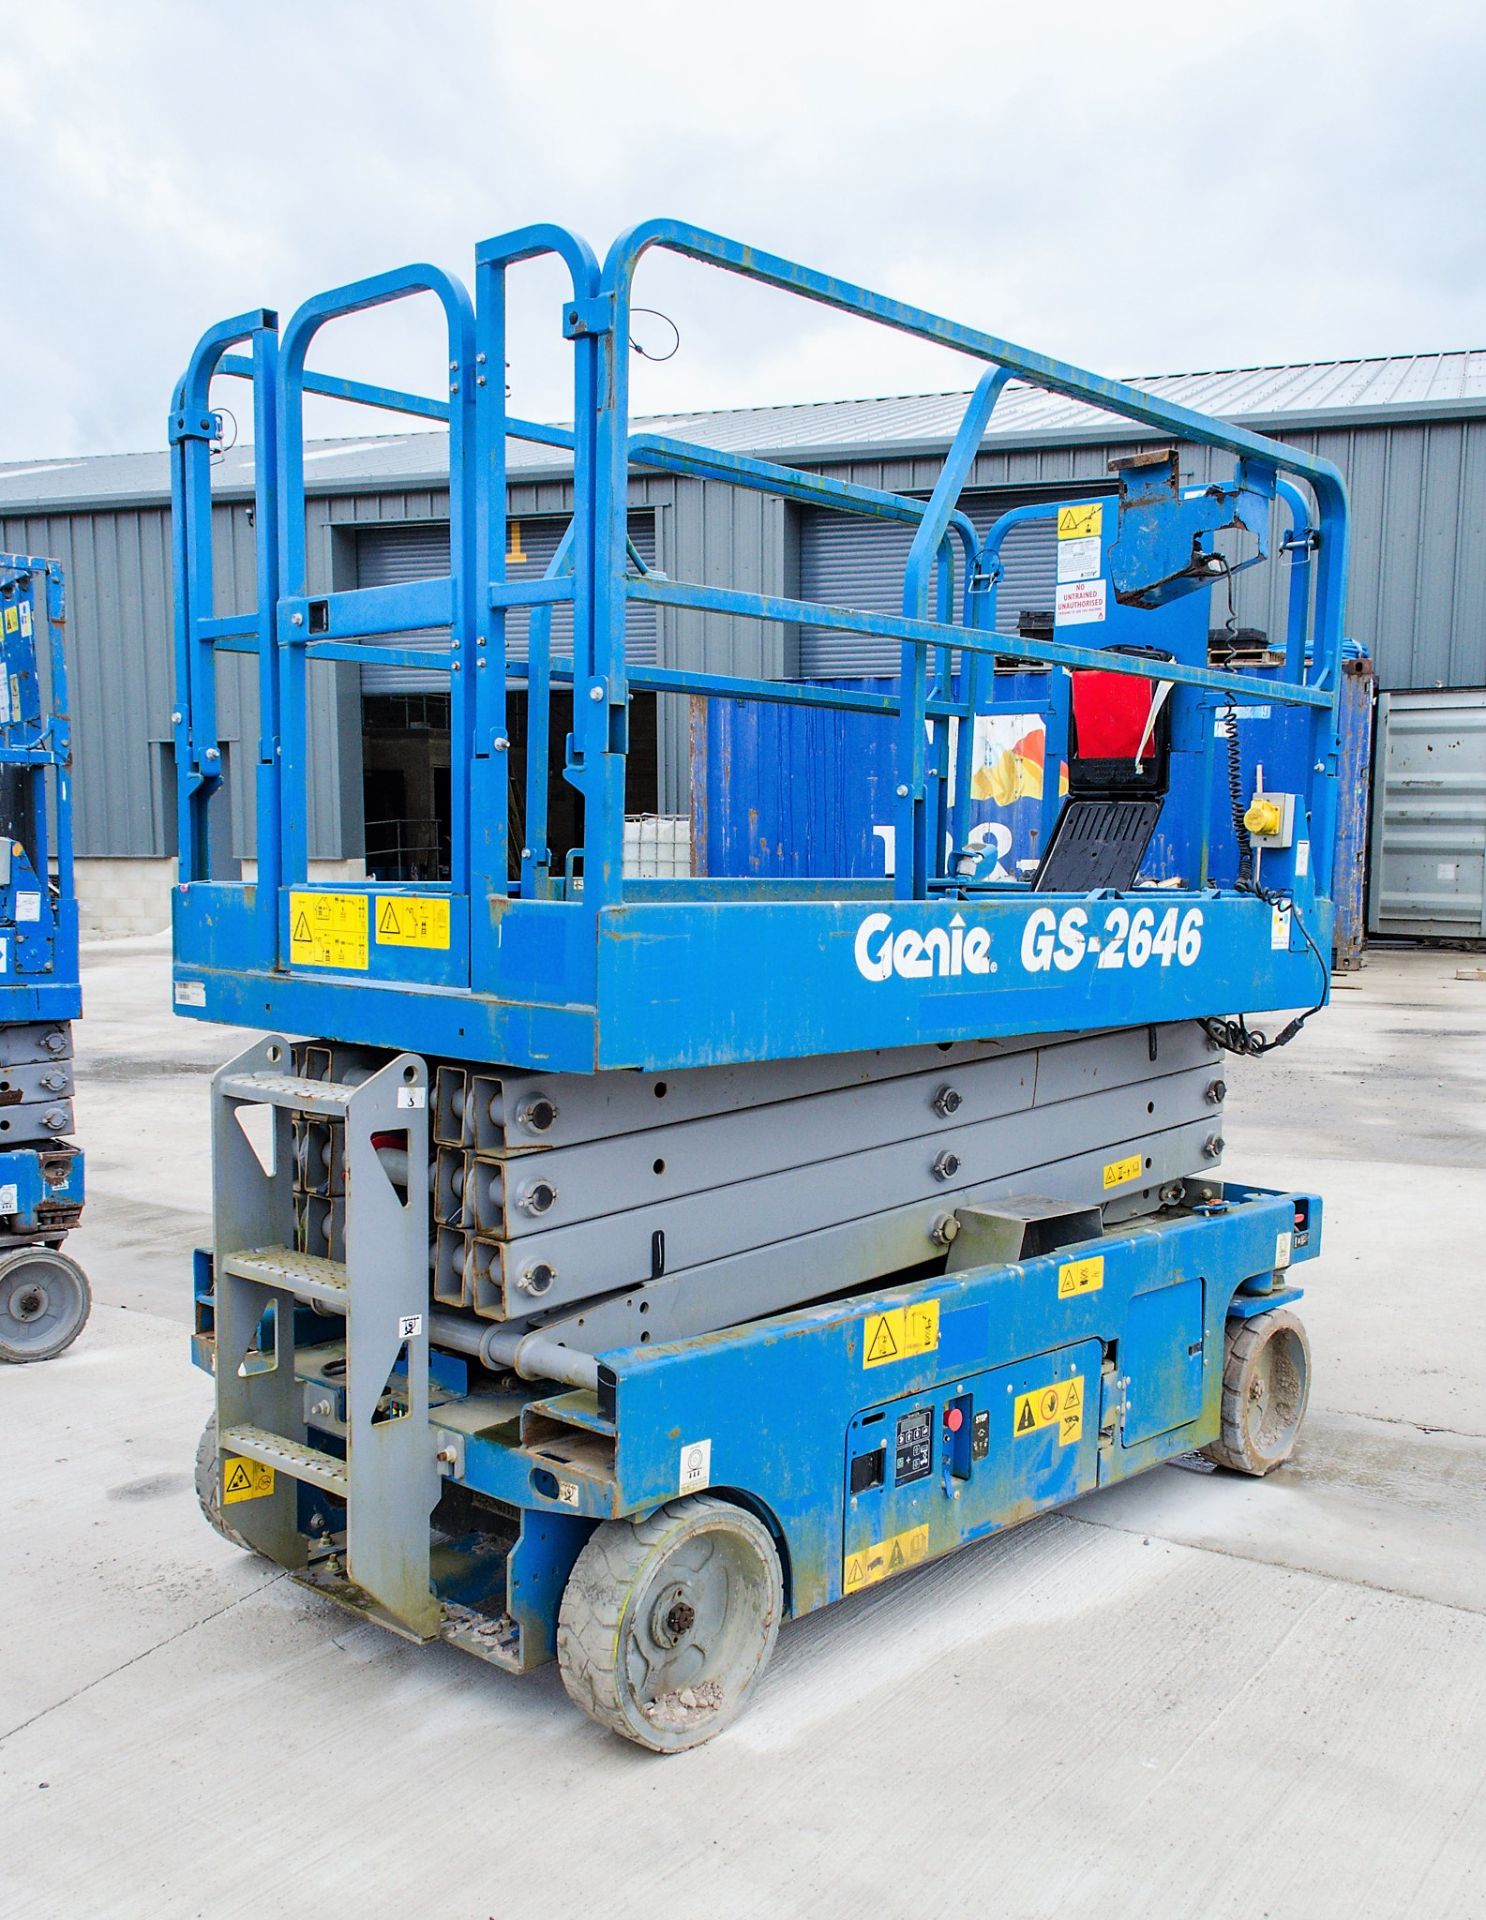 Genie GS2646 battery electric scissor lift access platform Year: 2018 S/N: 11979 A778613 - Image 4 of 9